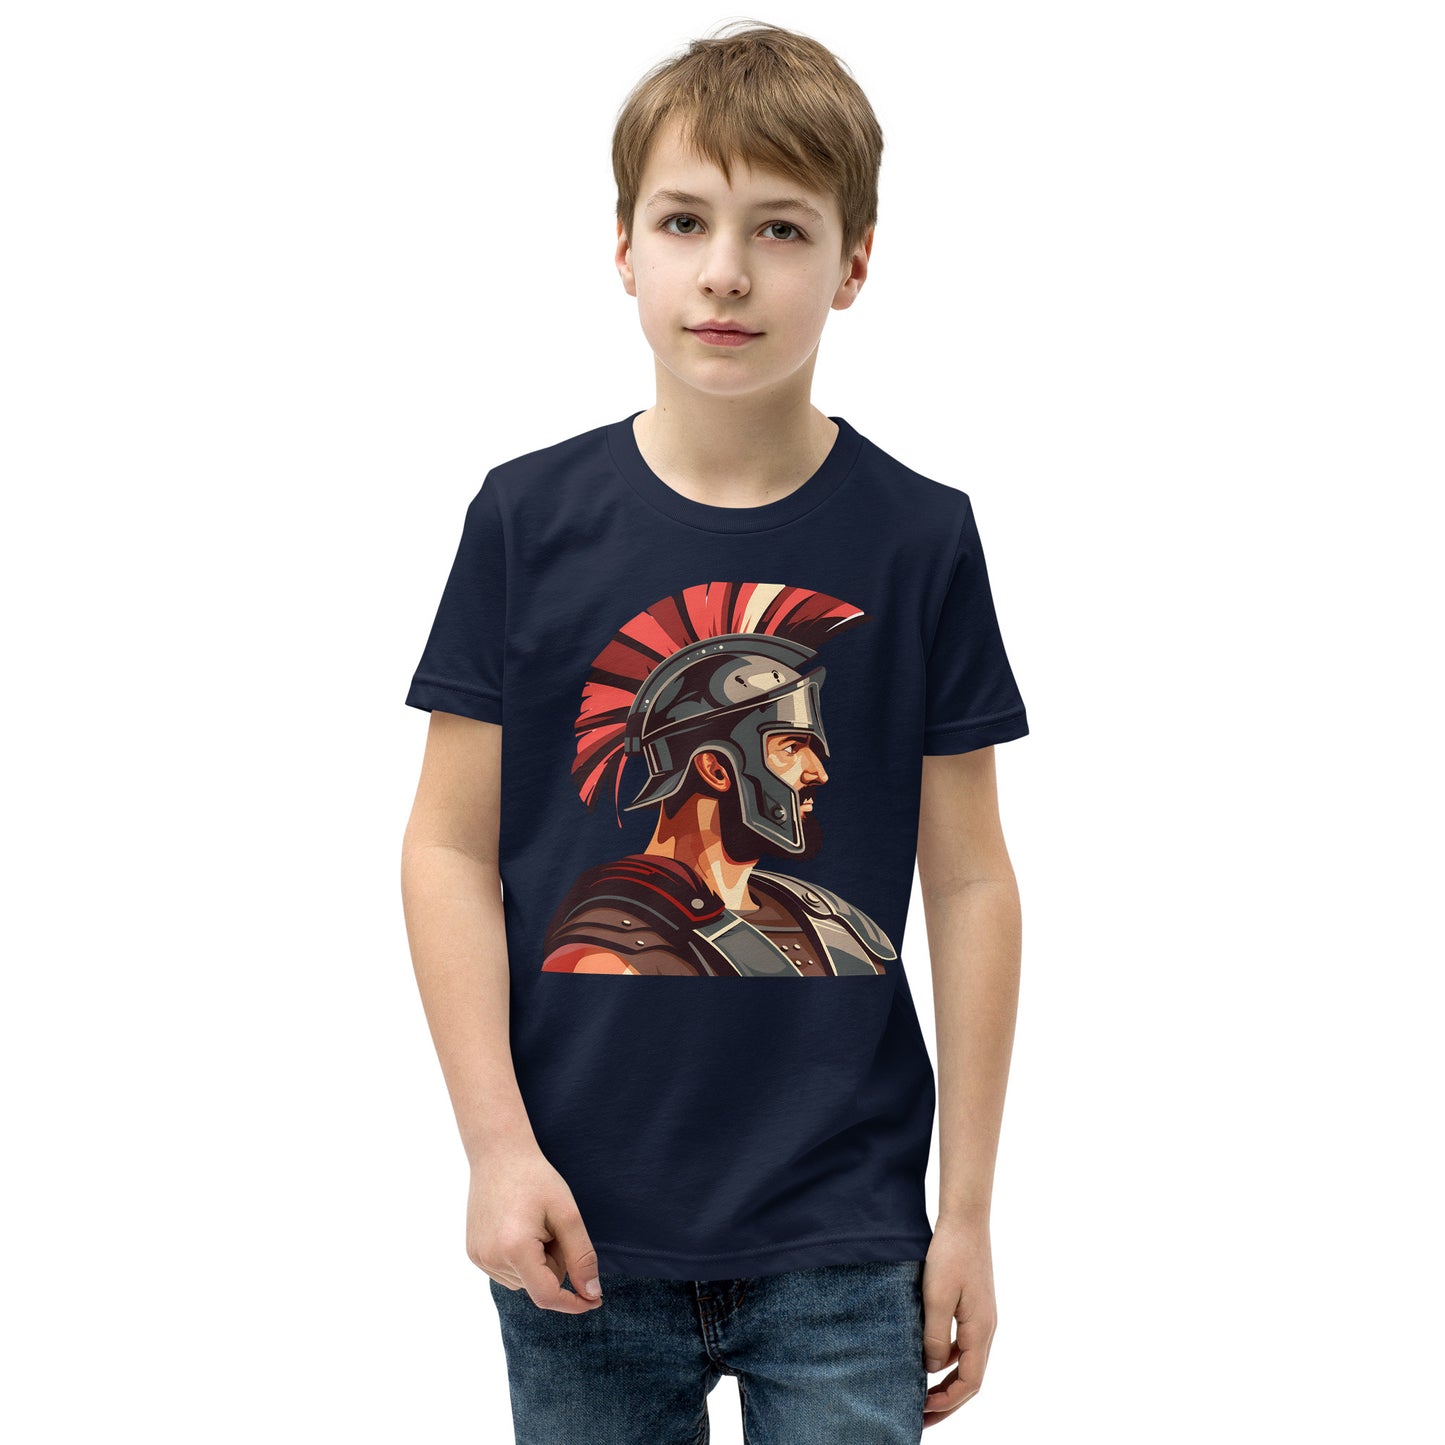 Teenager with a Navy T-shirt with a print of a warrior